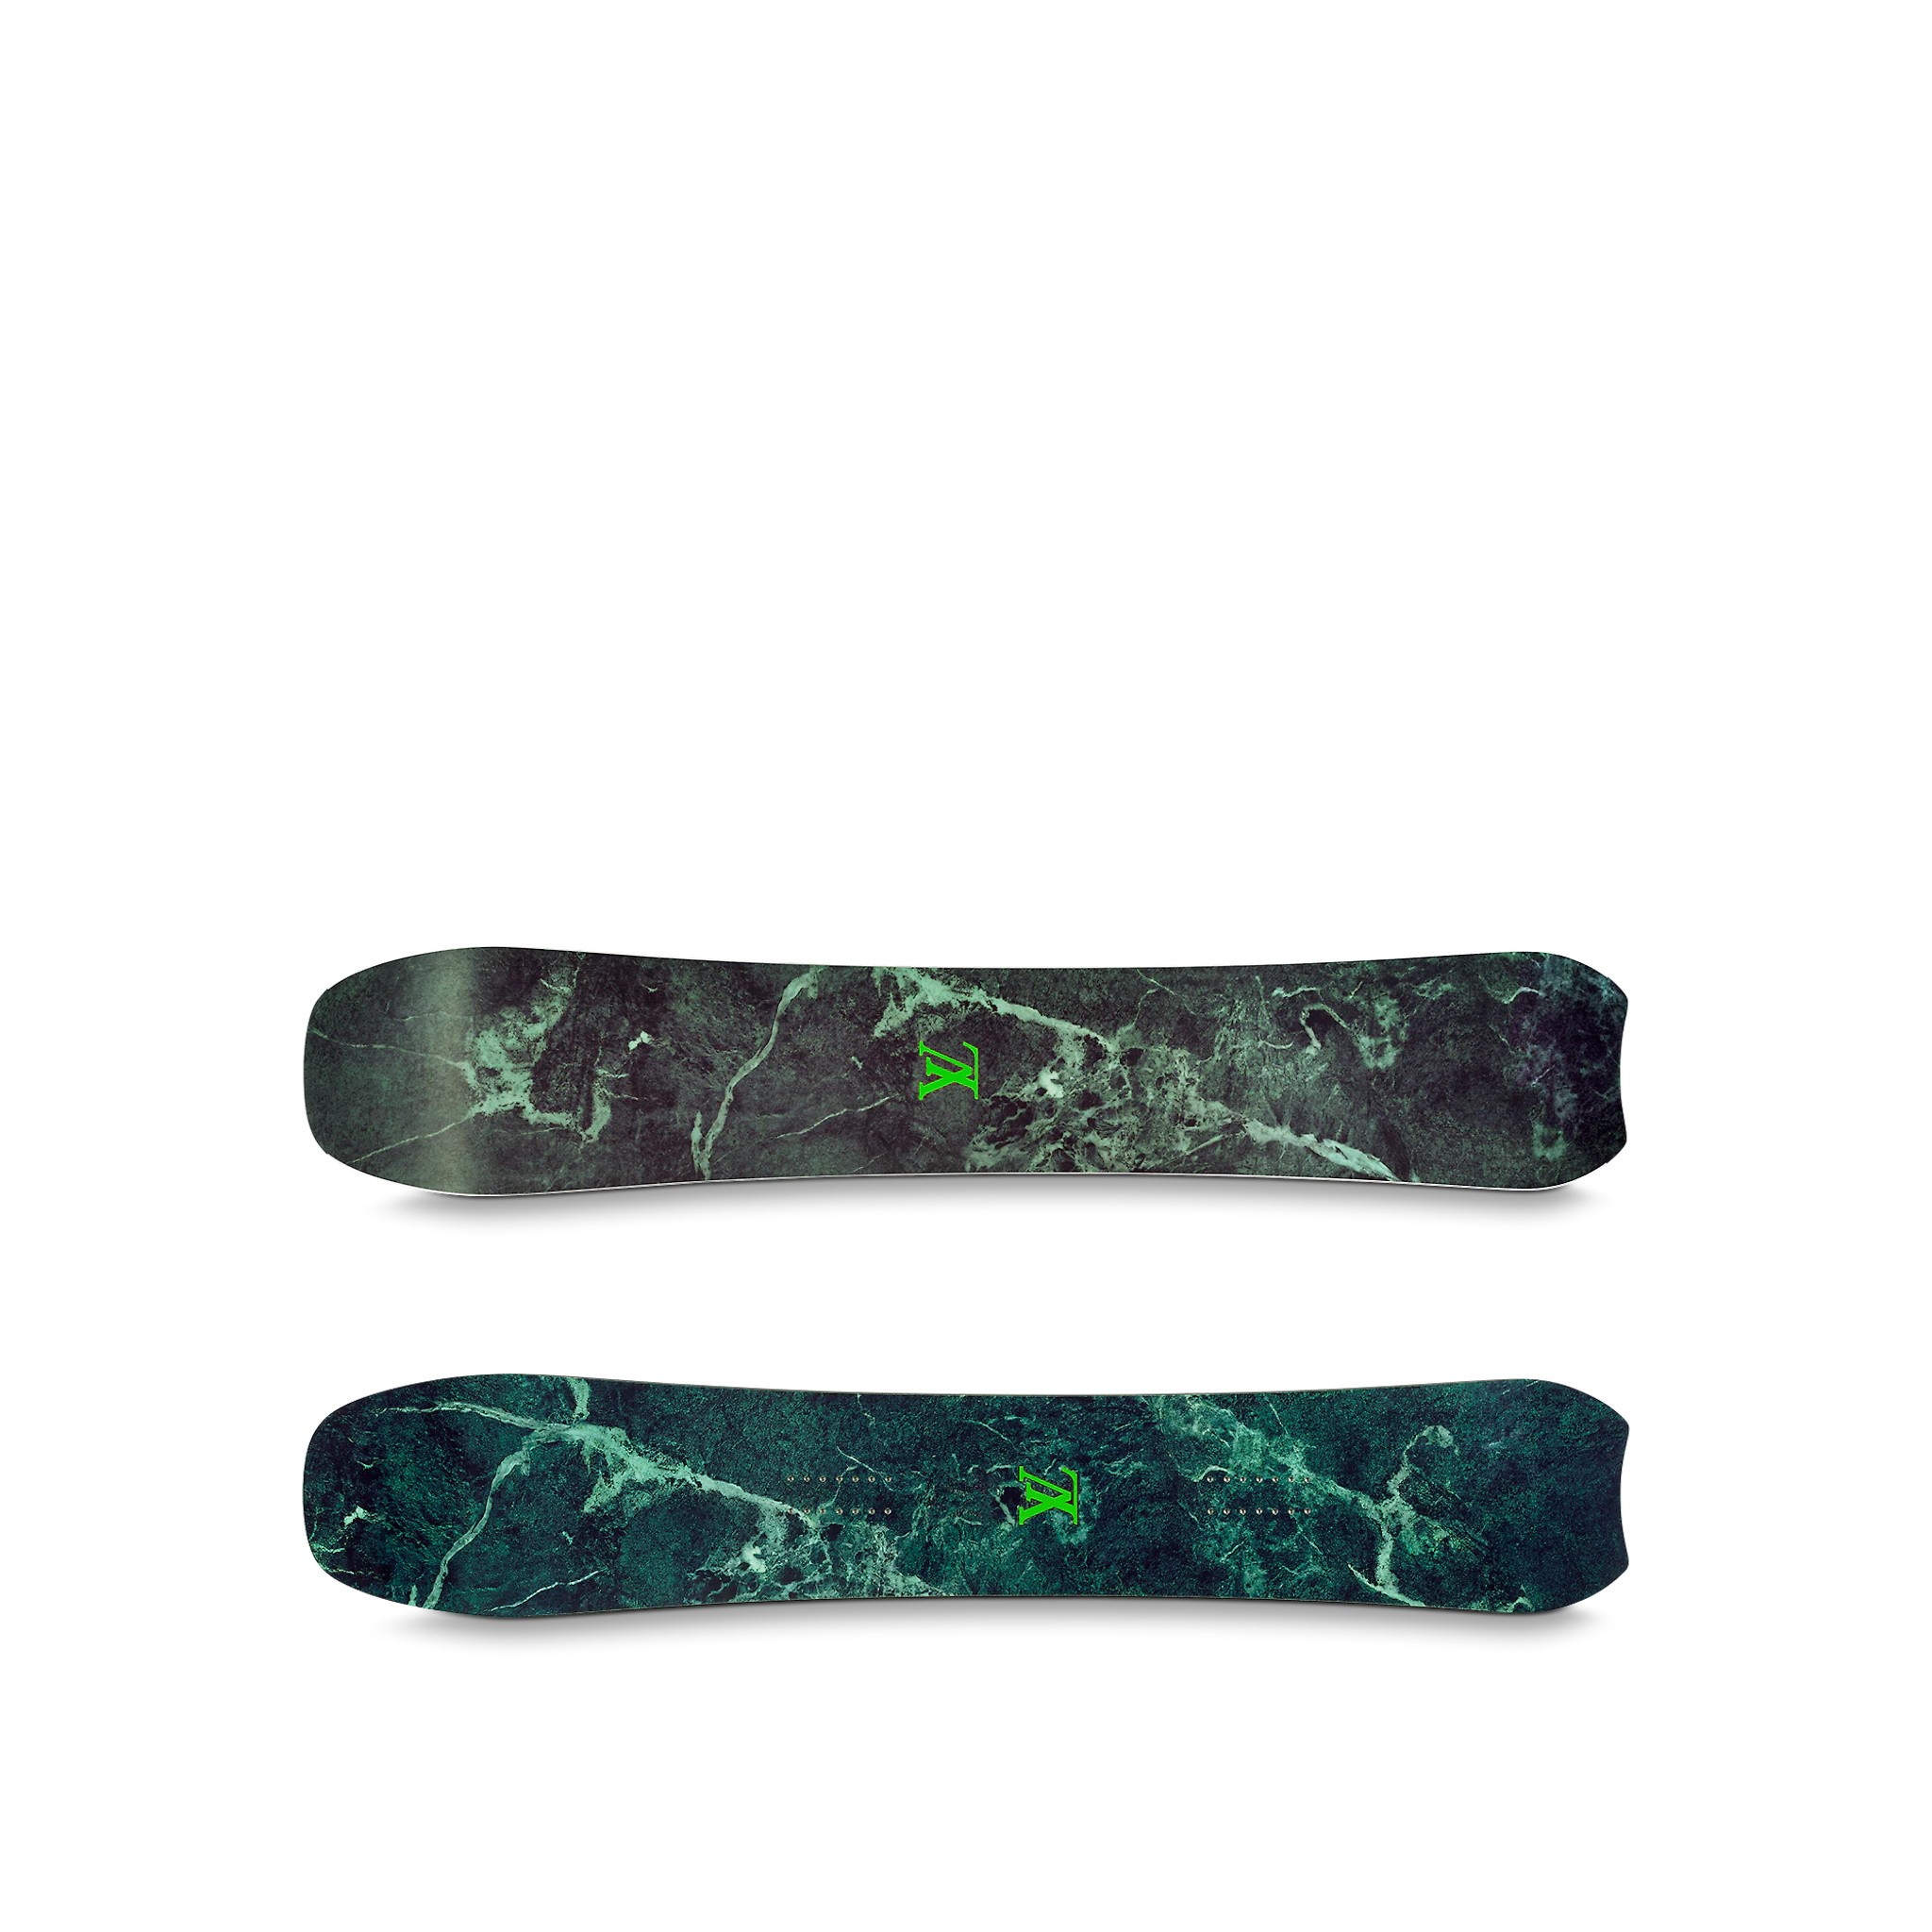 Limited-Edition Louis Vuitton Snowboard Is How You Do Winter in